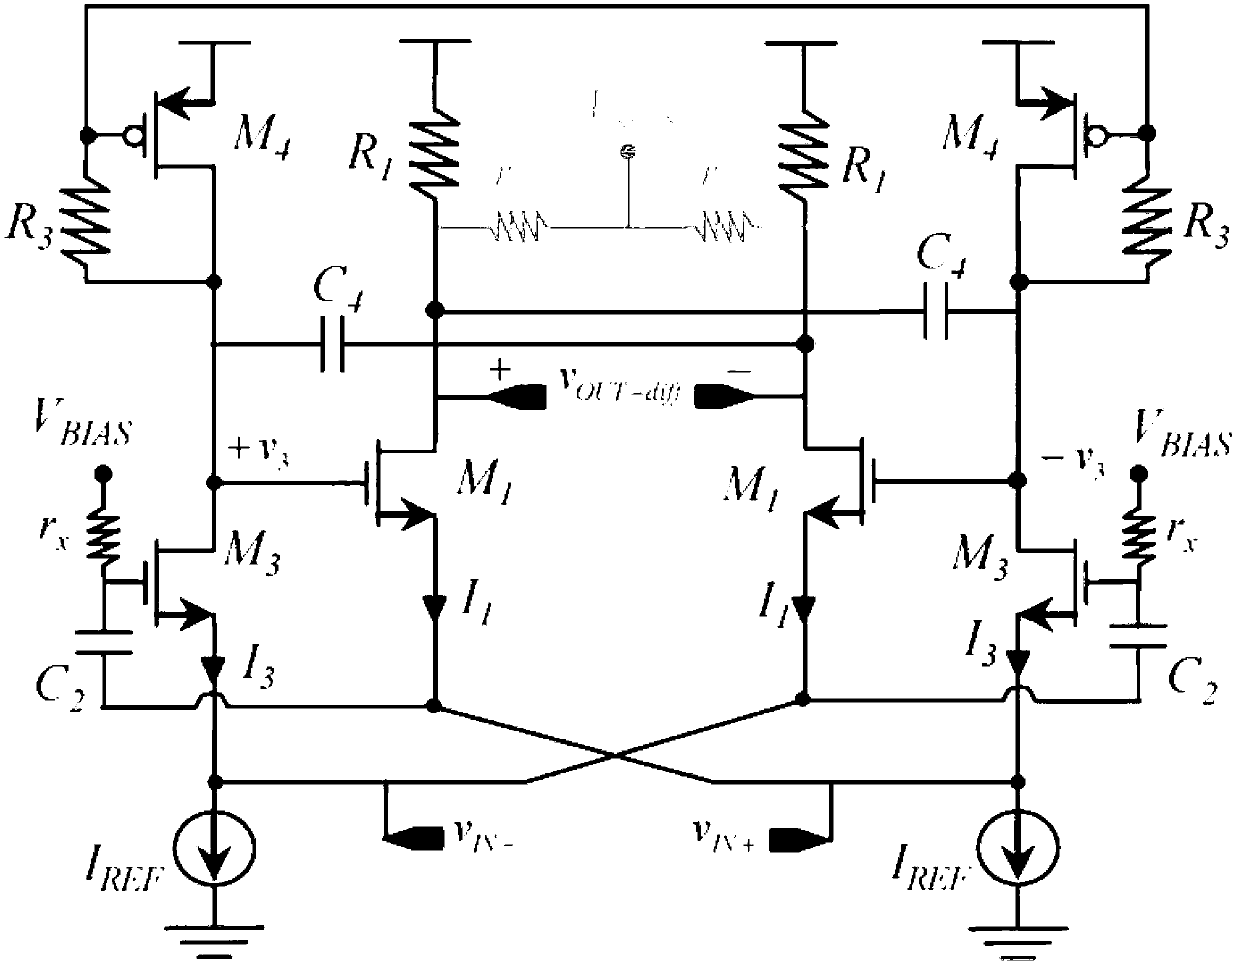 Low-power consumption and low-noise amplifier adopting noise cancellation technology